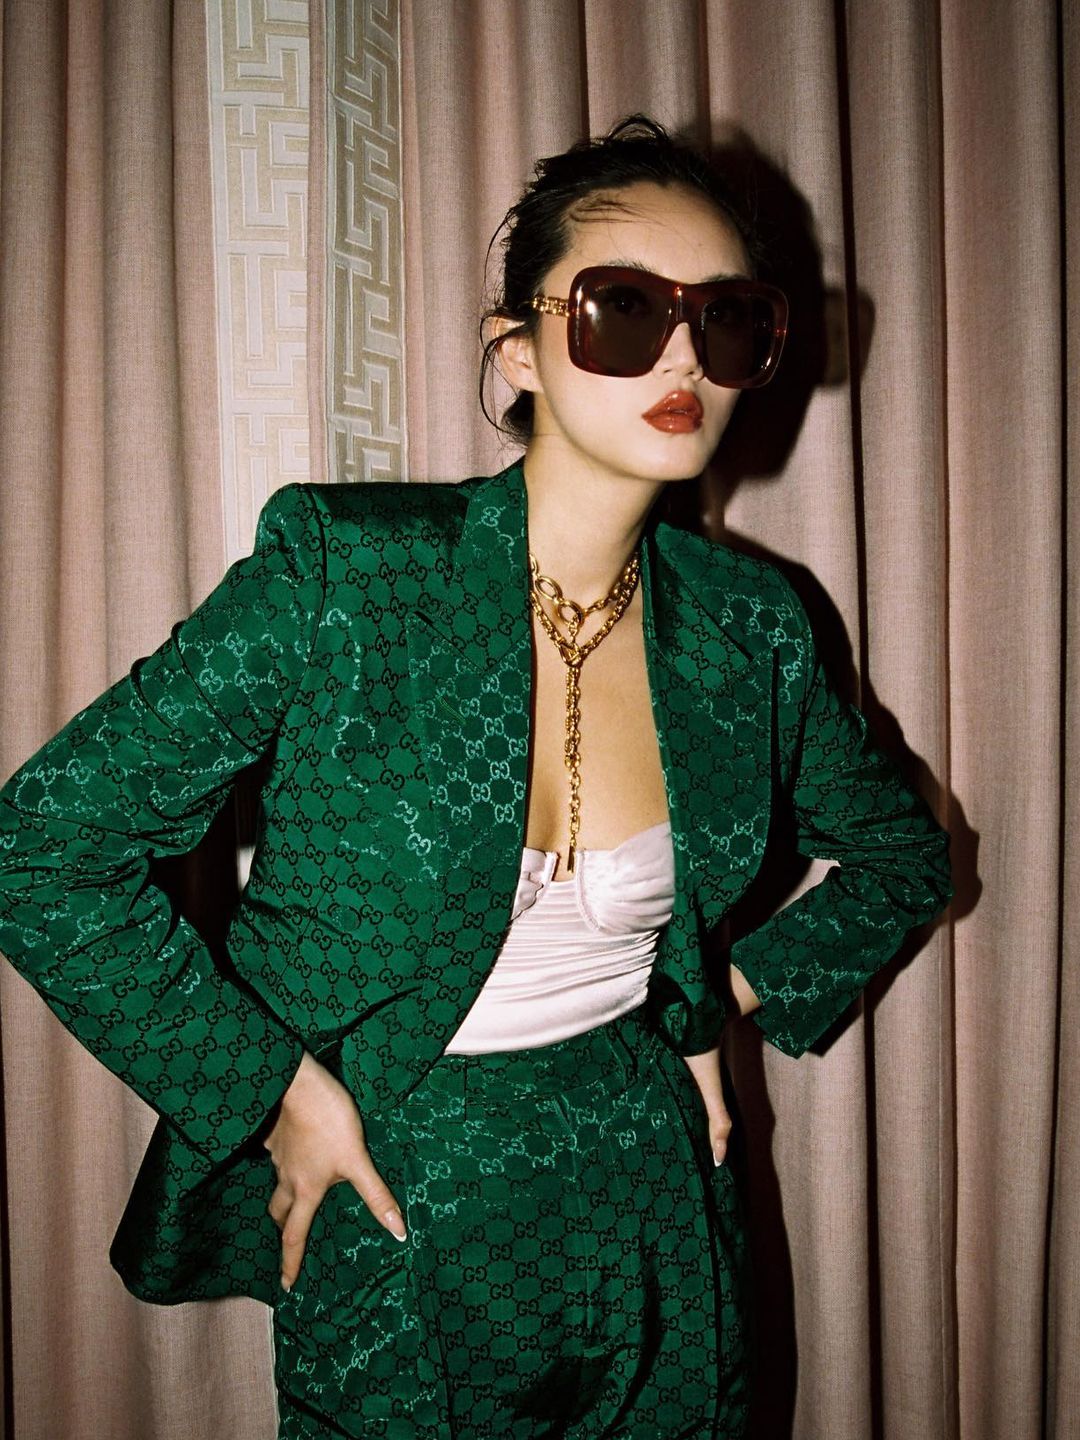 Betty Bachz wears a green guicci suit with a white corset and oversized sunglasses